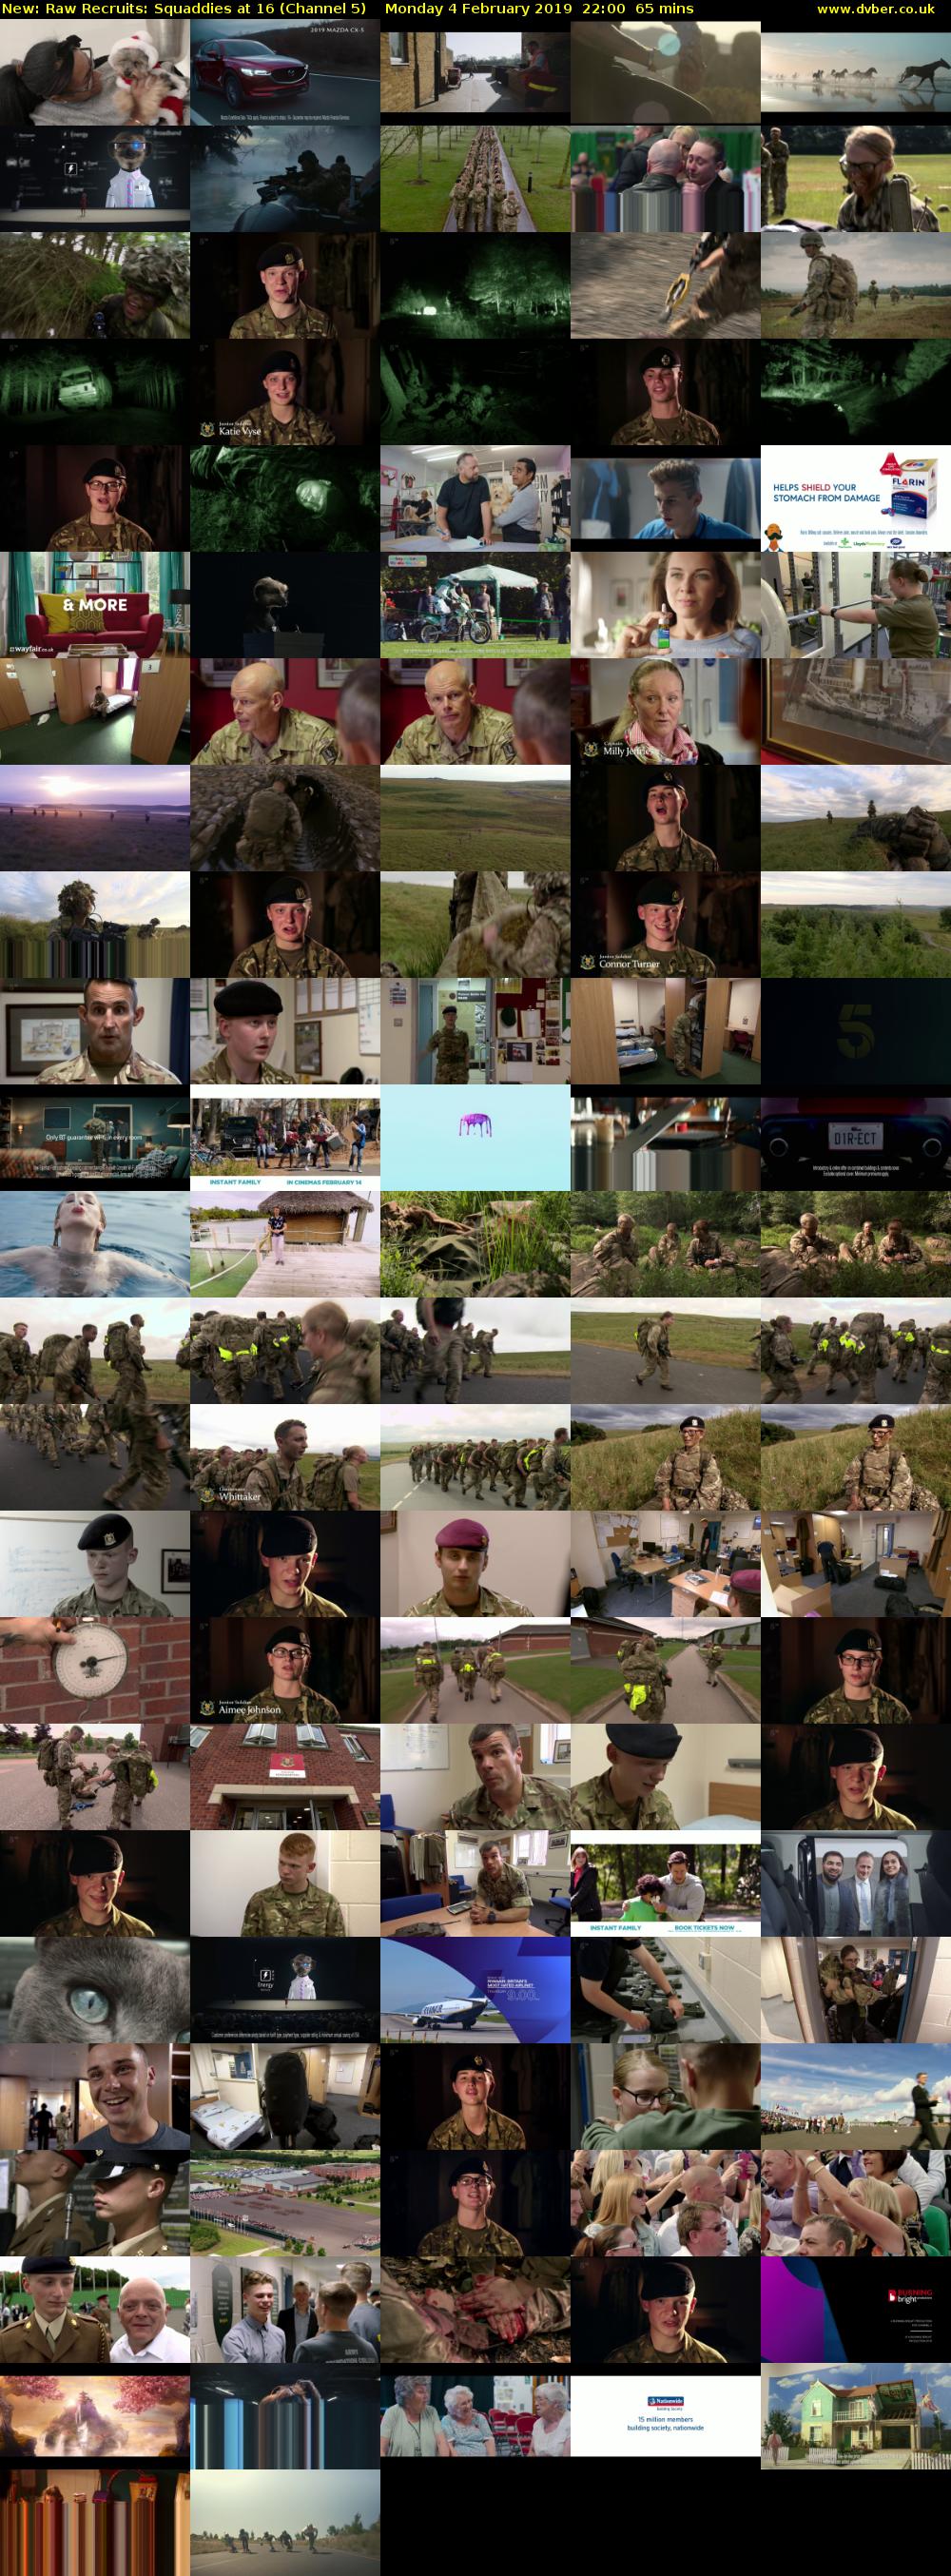 Raw Recruits: Squaddies at 16 (Channel 5) Monday 4 February 2019 22:00 - 23:05